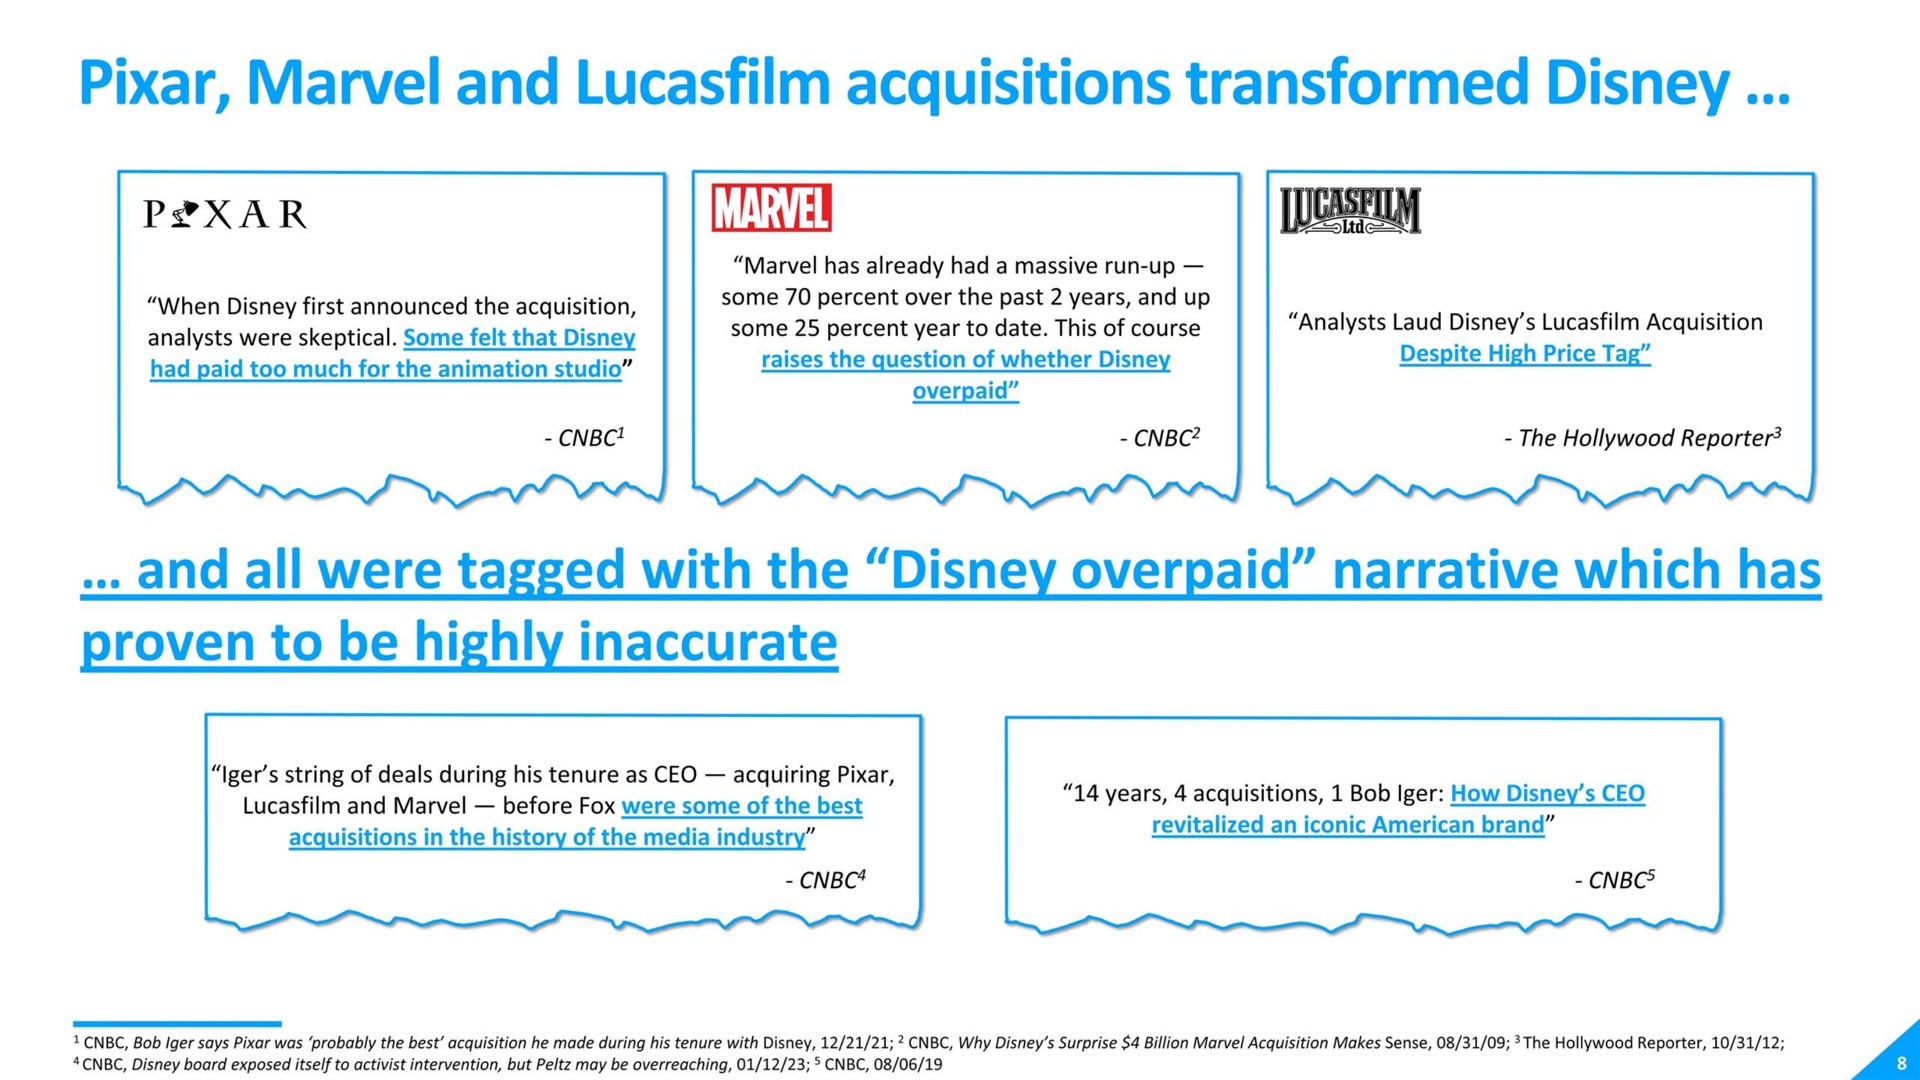 marvel and acquisitions transformed vessel and all were tagged with the overpaid narrative which has proven to be highly inaccurate | Disney